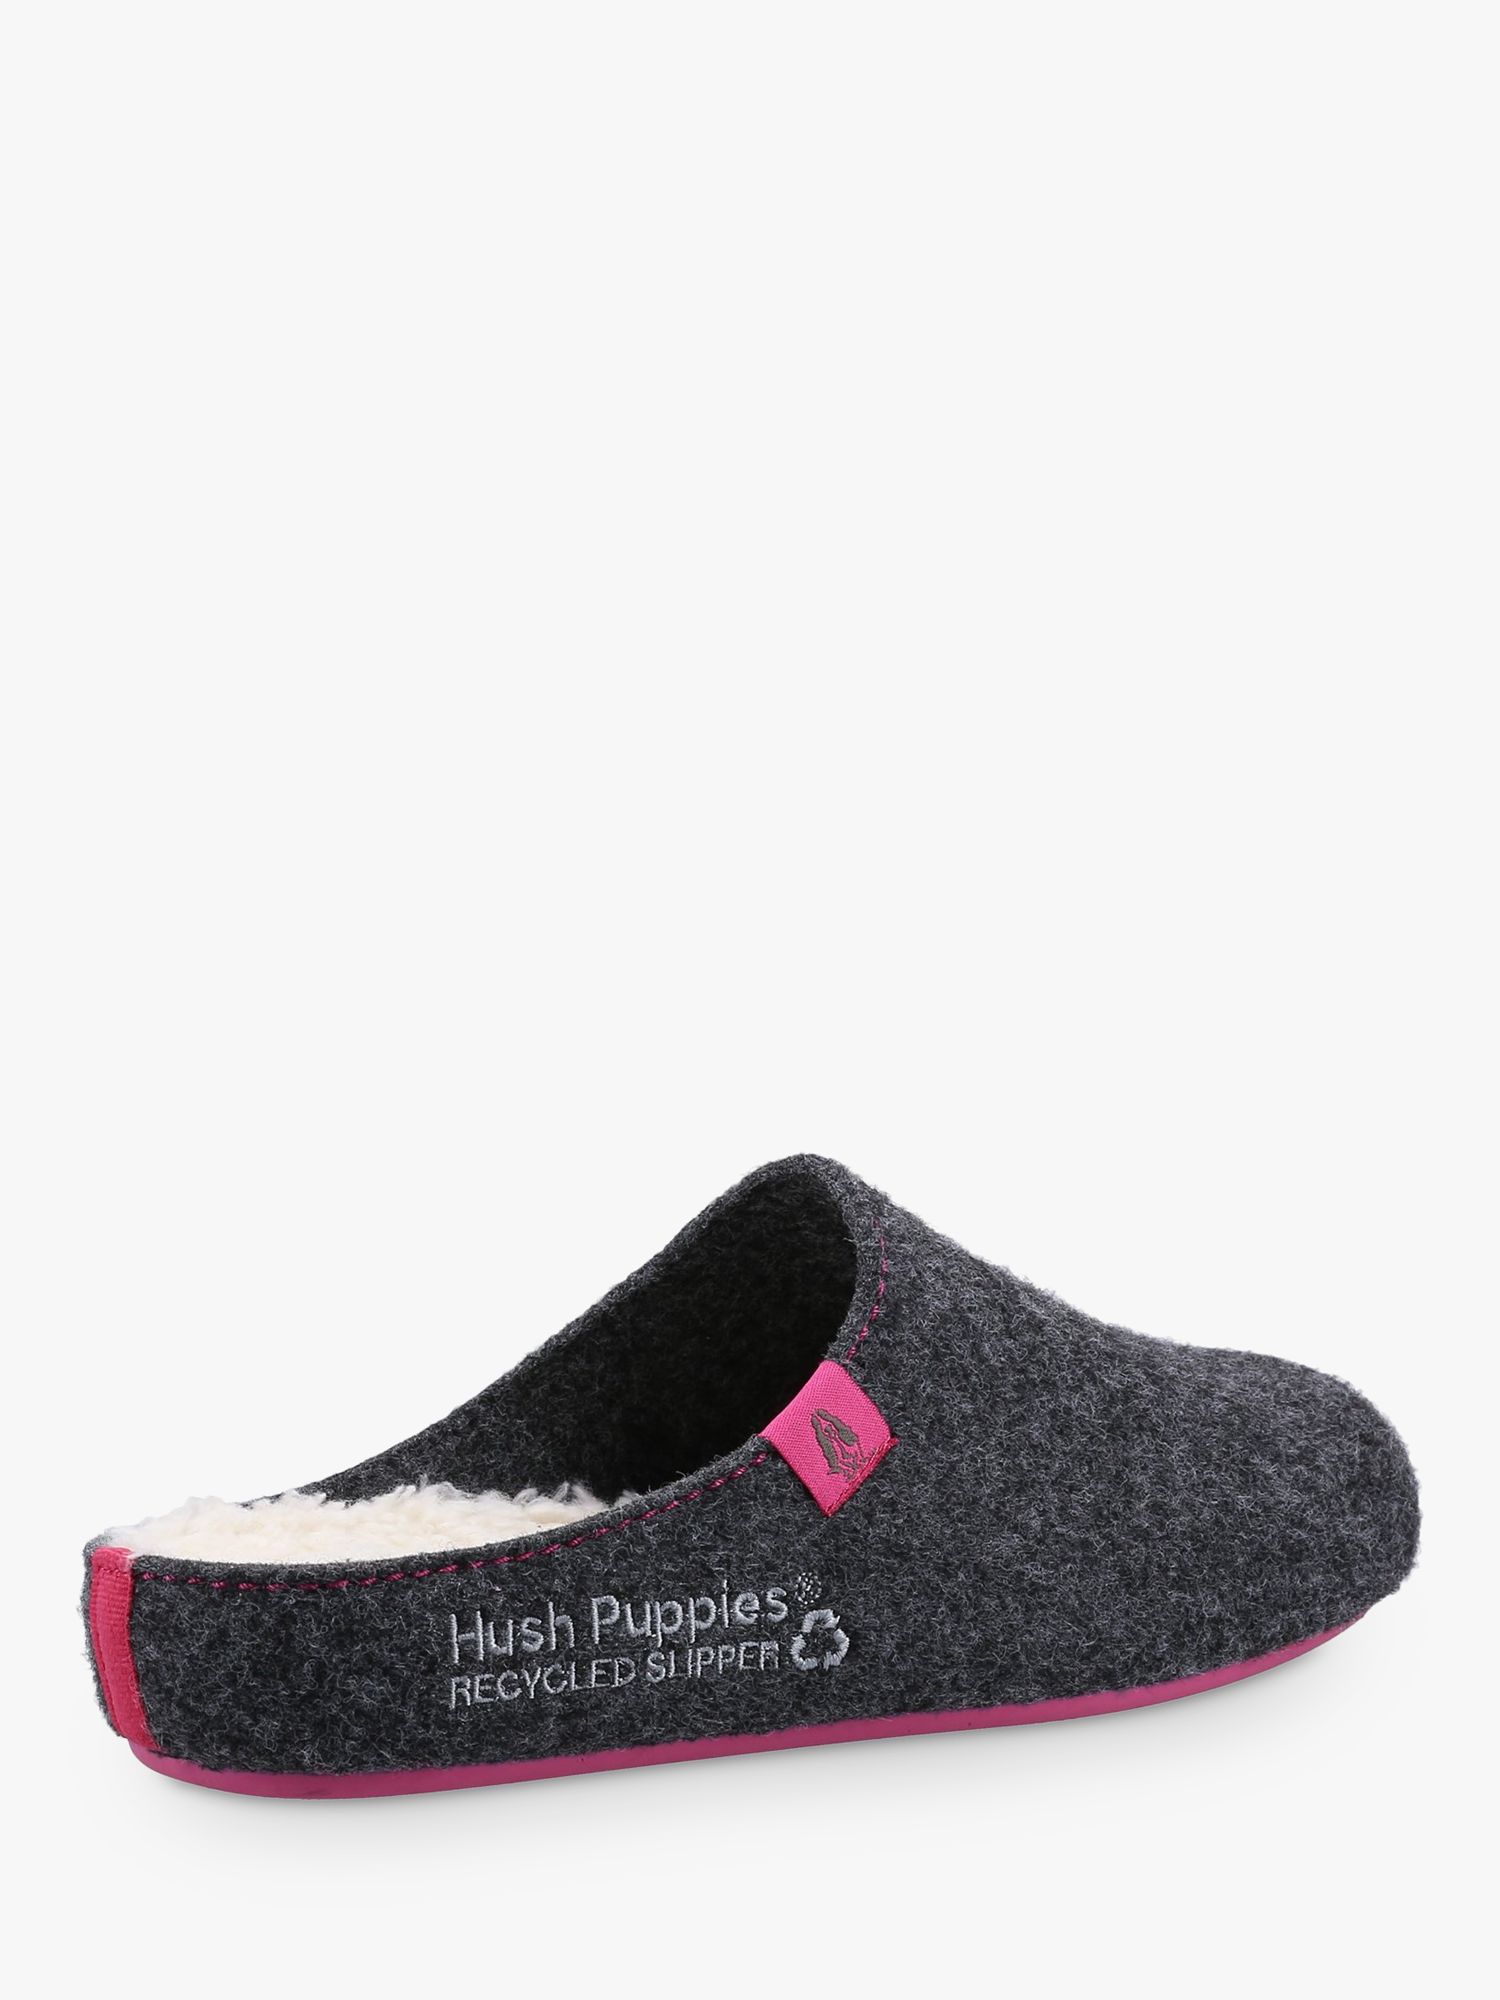 Hush Puppies The Good Mule Slippers, Charcoal, 3